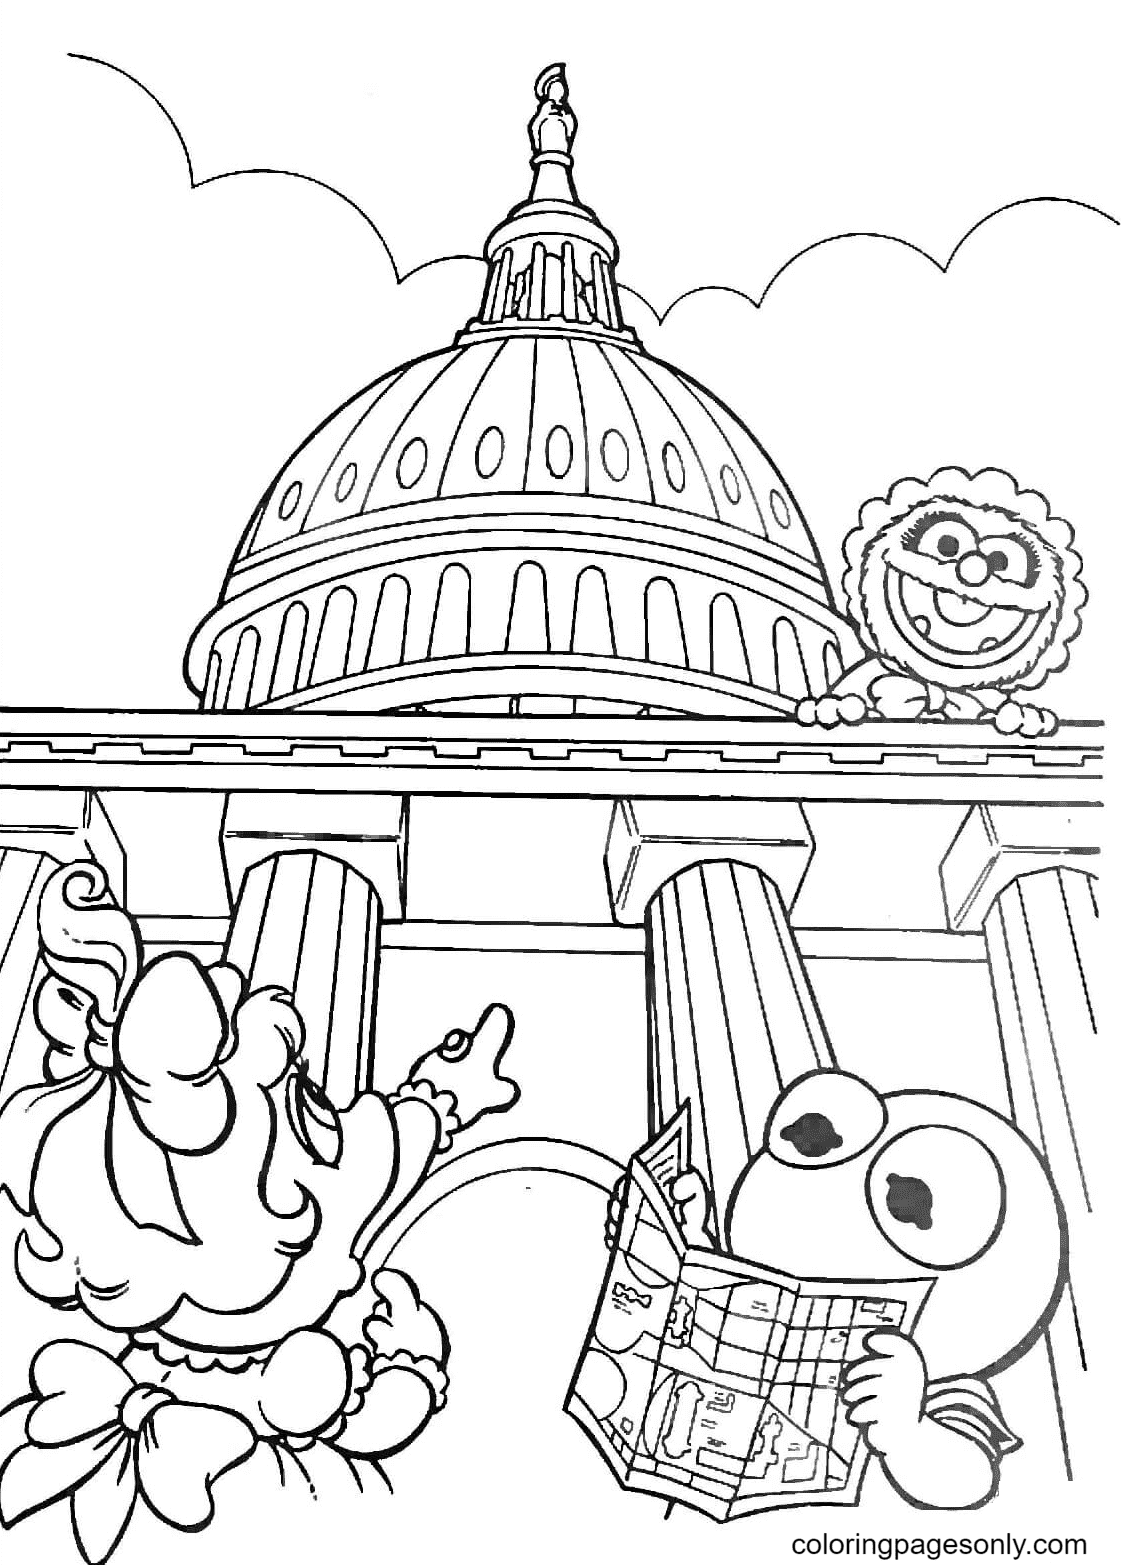 Muppet Babies in Washington DC Coloring Page